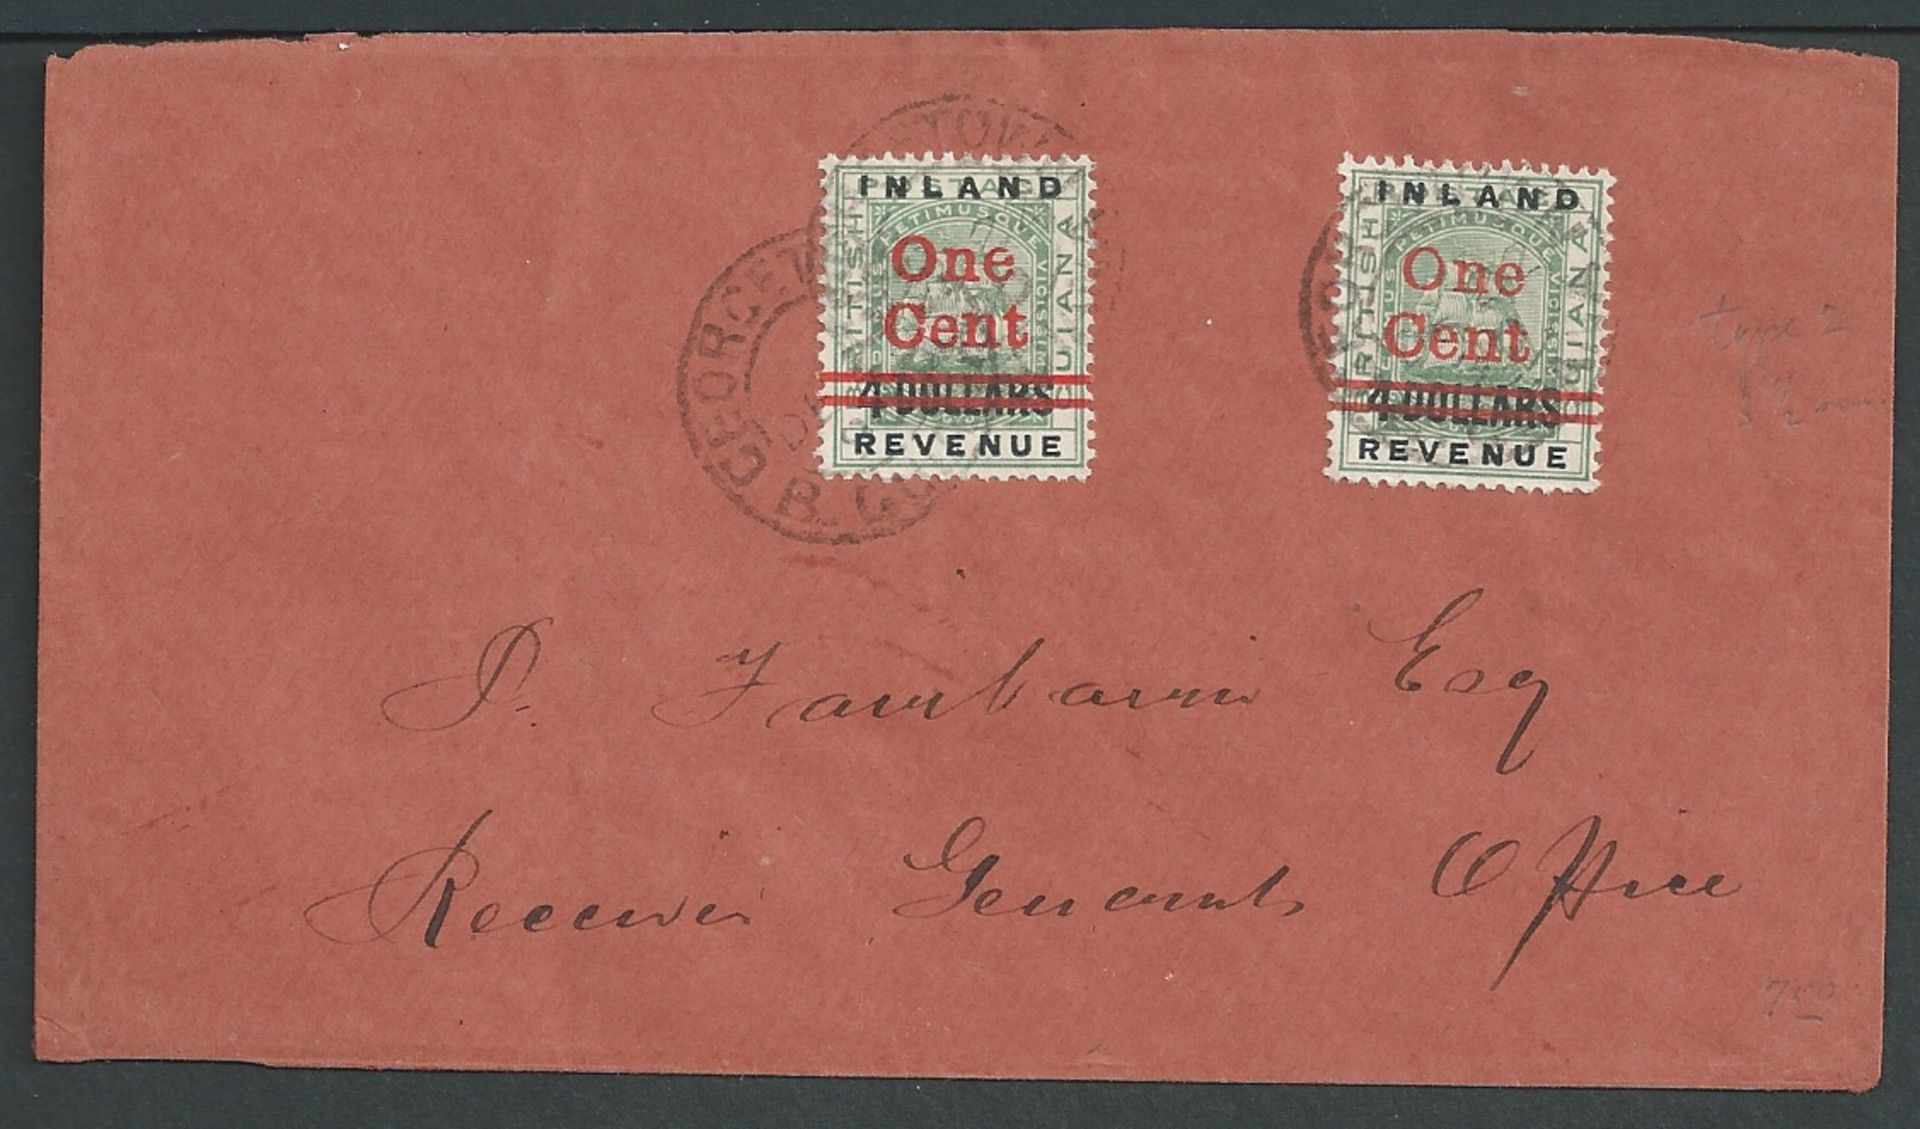 British Guiana 1890 Cover sent within Georgetown franked One Cent on $4 Inland Revenue (2).